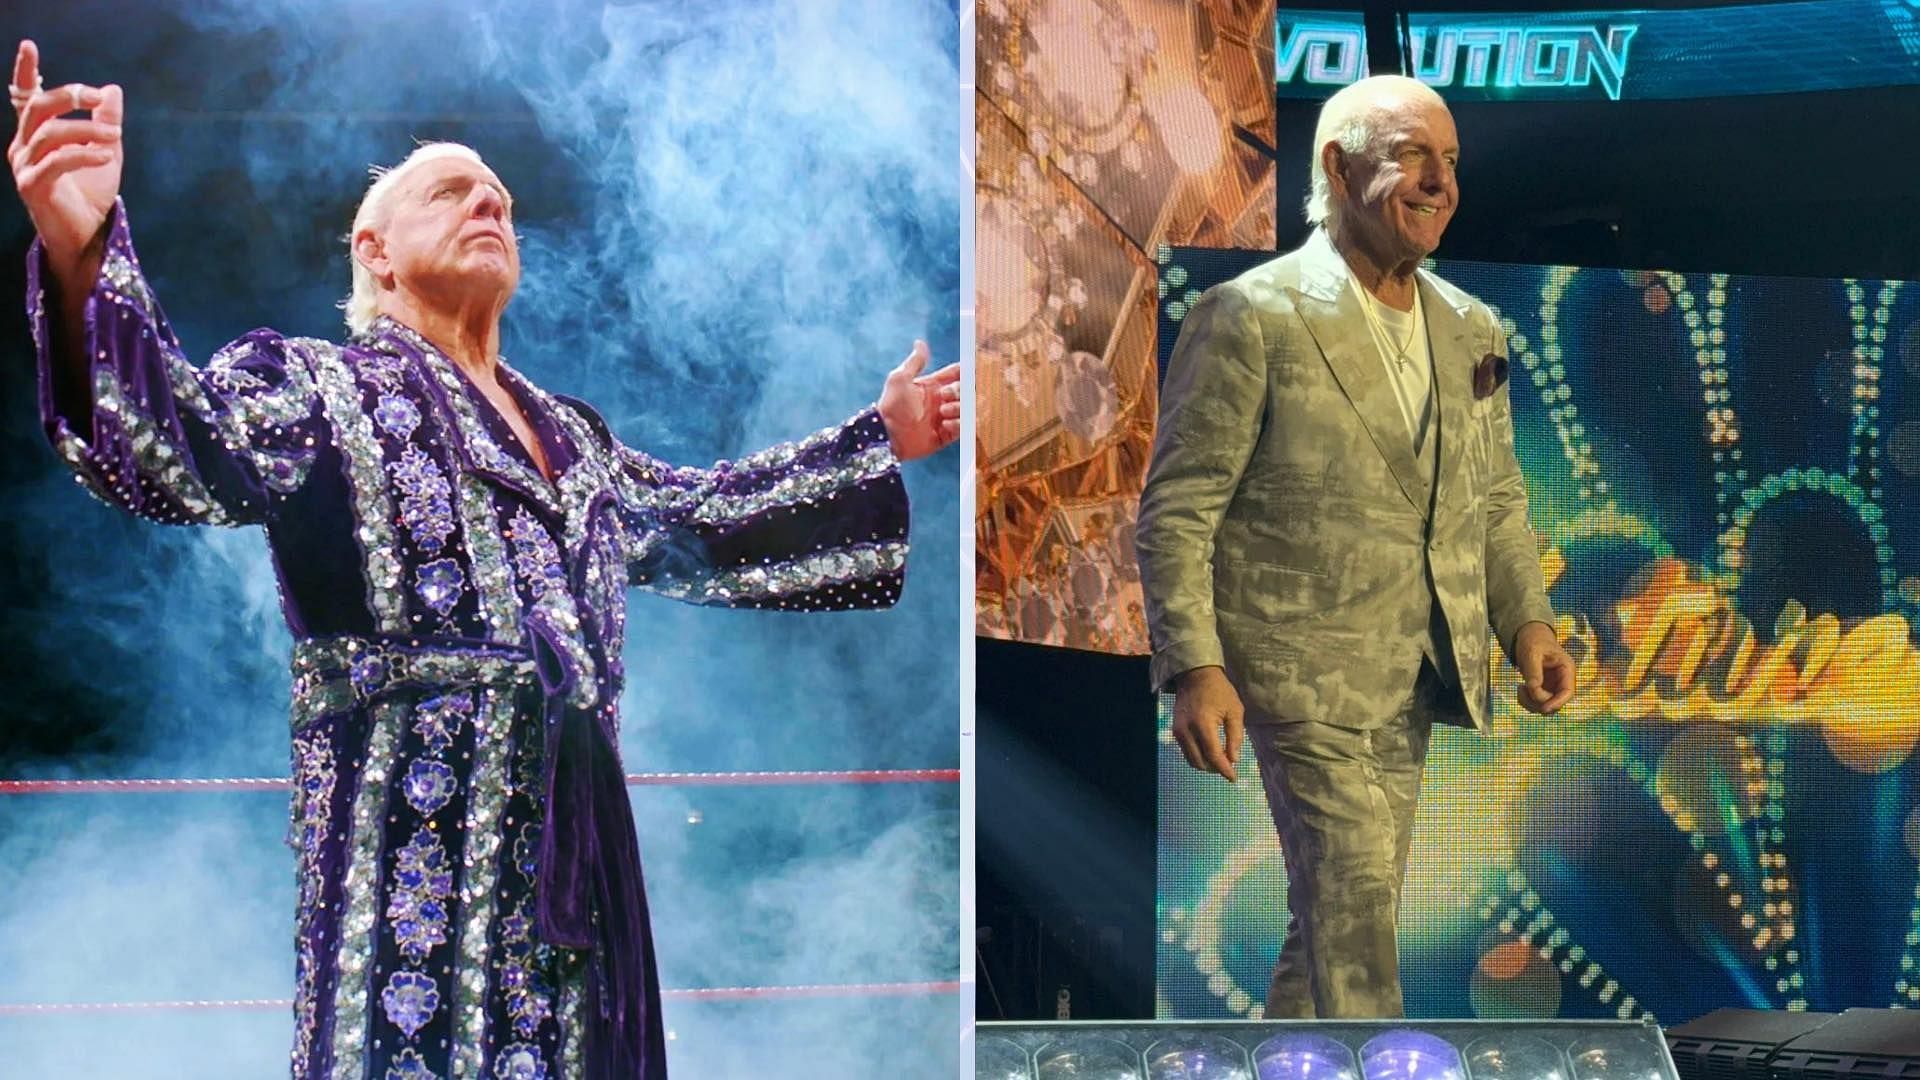 Ric Flair has appeared in AEW as well